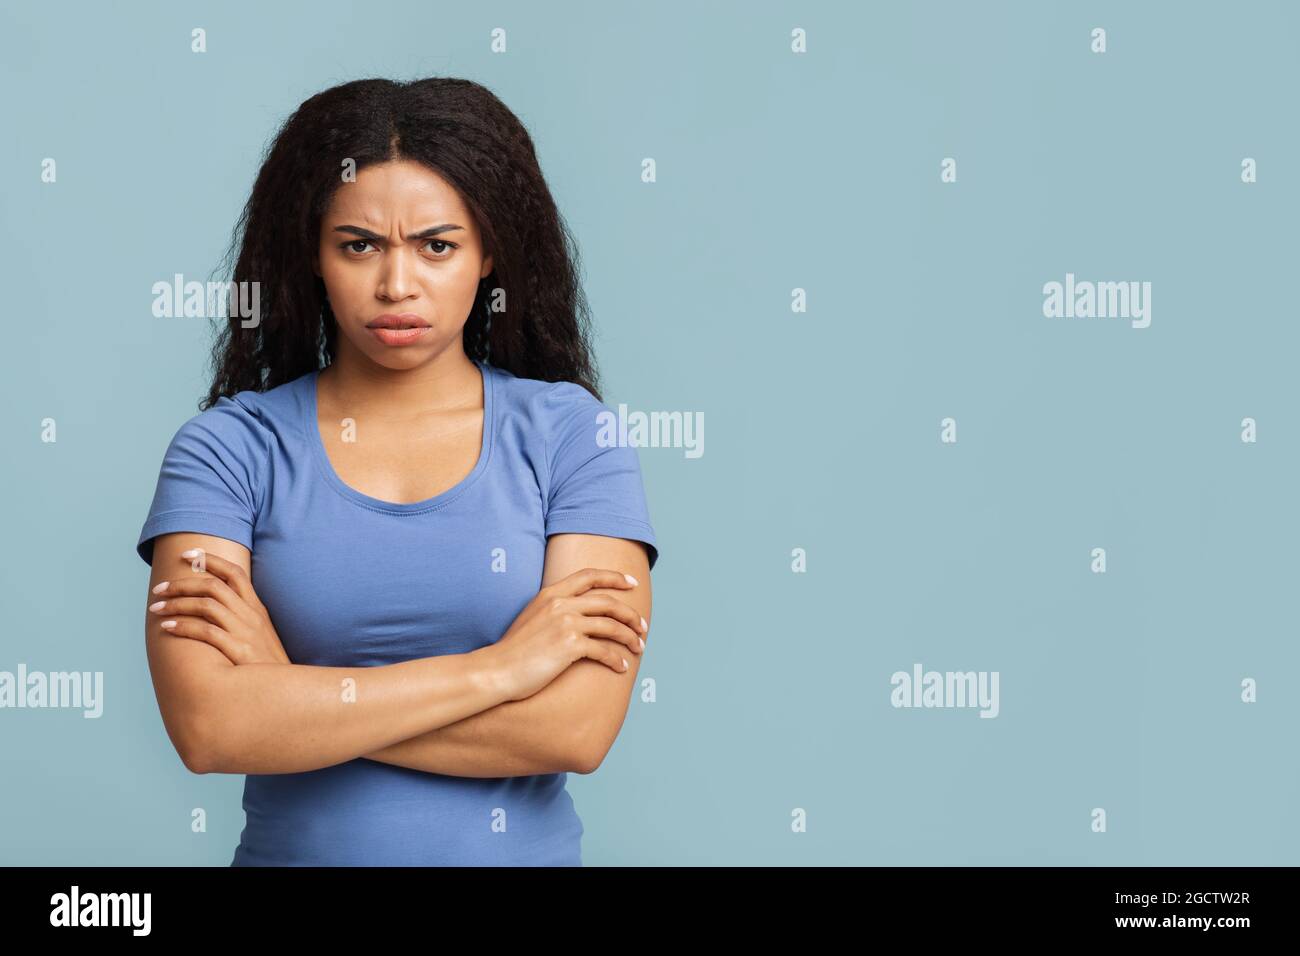 Grumpy woman. Portrait of serious black lady standing with crossed arms, posing over blue background with free space Stock Photo